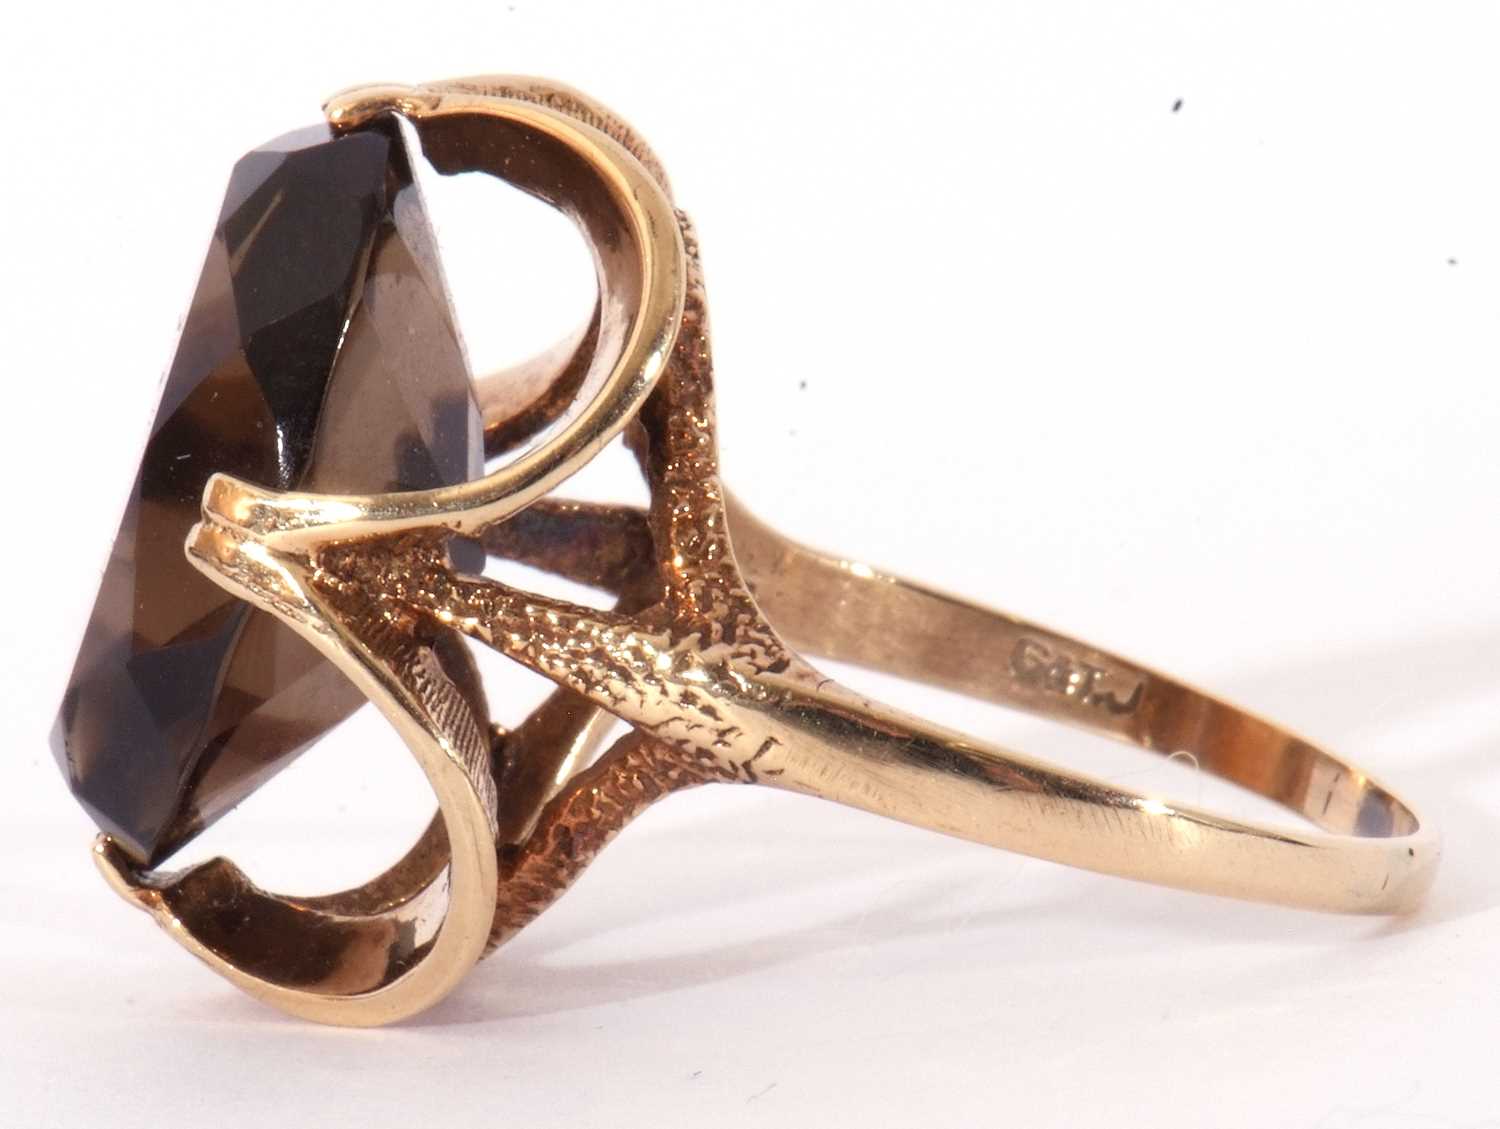 9ct gold smoky quartz dress ring, the large oval faceted quartz cardinal set in a stylised mount, - Image 3 of 9